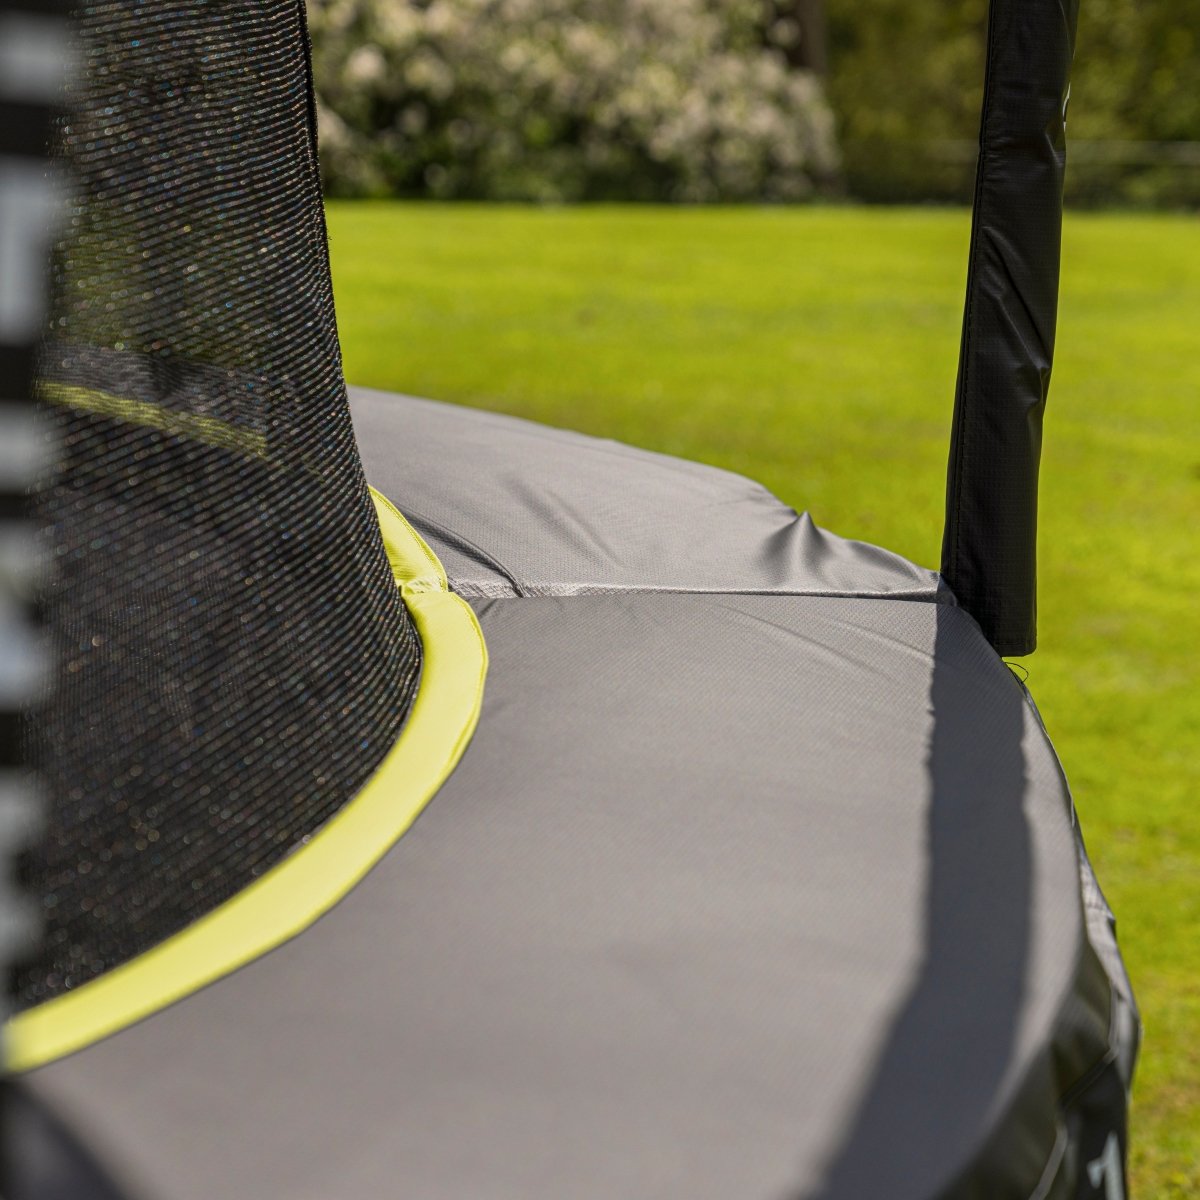 Rebo Summit Oval Trampoline and Safety Enclosure - Summit 1600